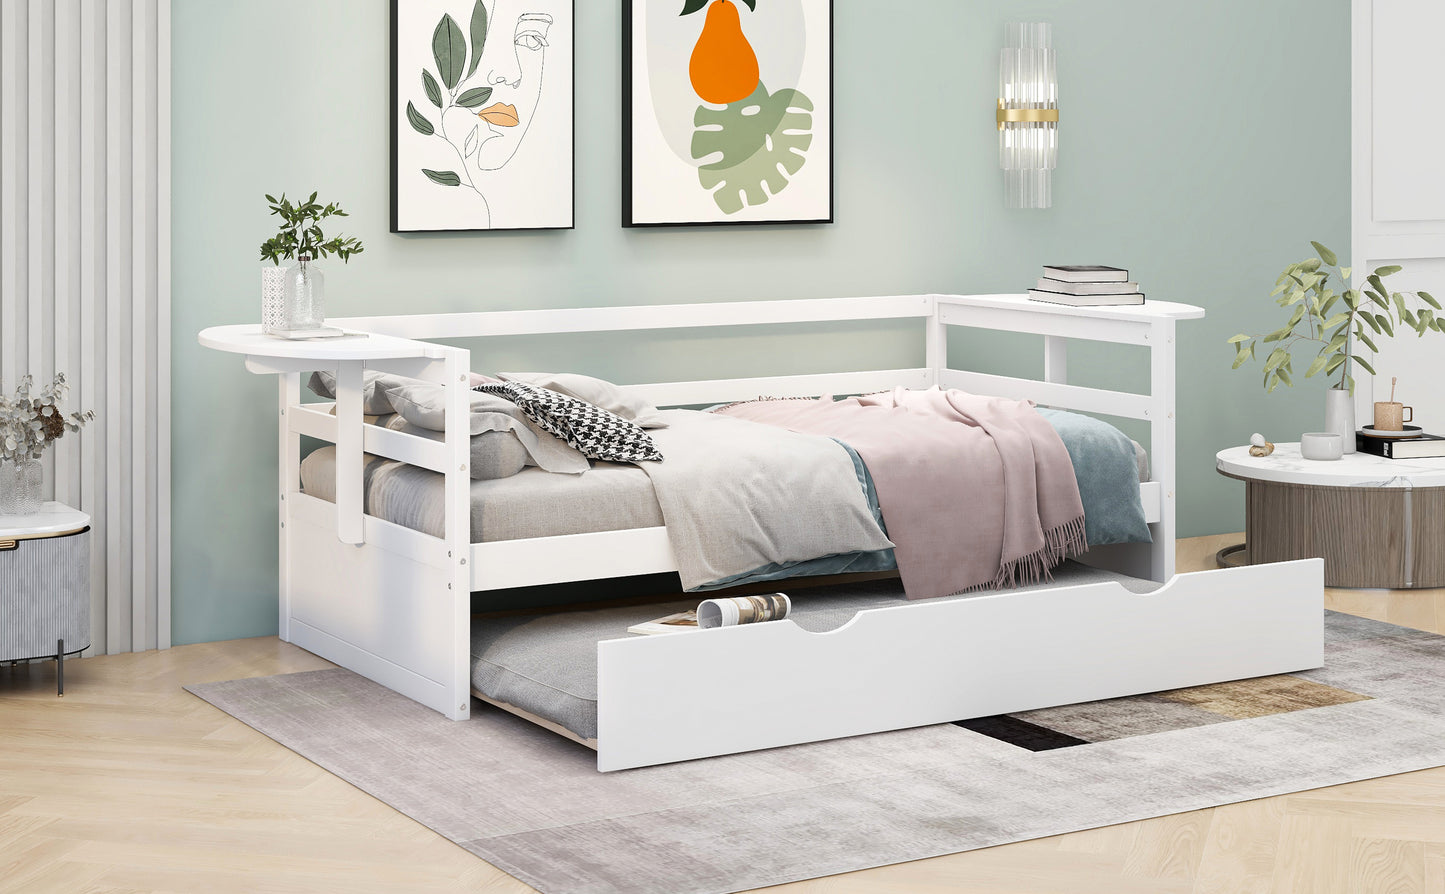 Twin Size Daybed with Trundle and Foldable Shelves on Both Sides,White